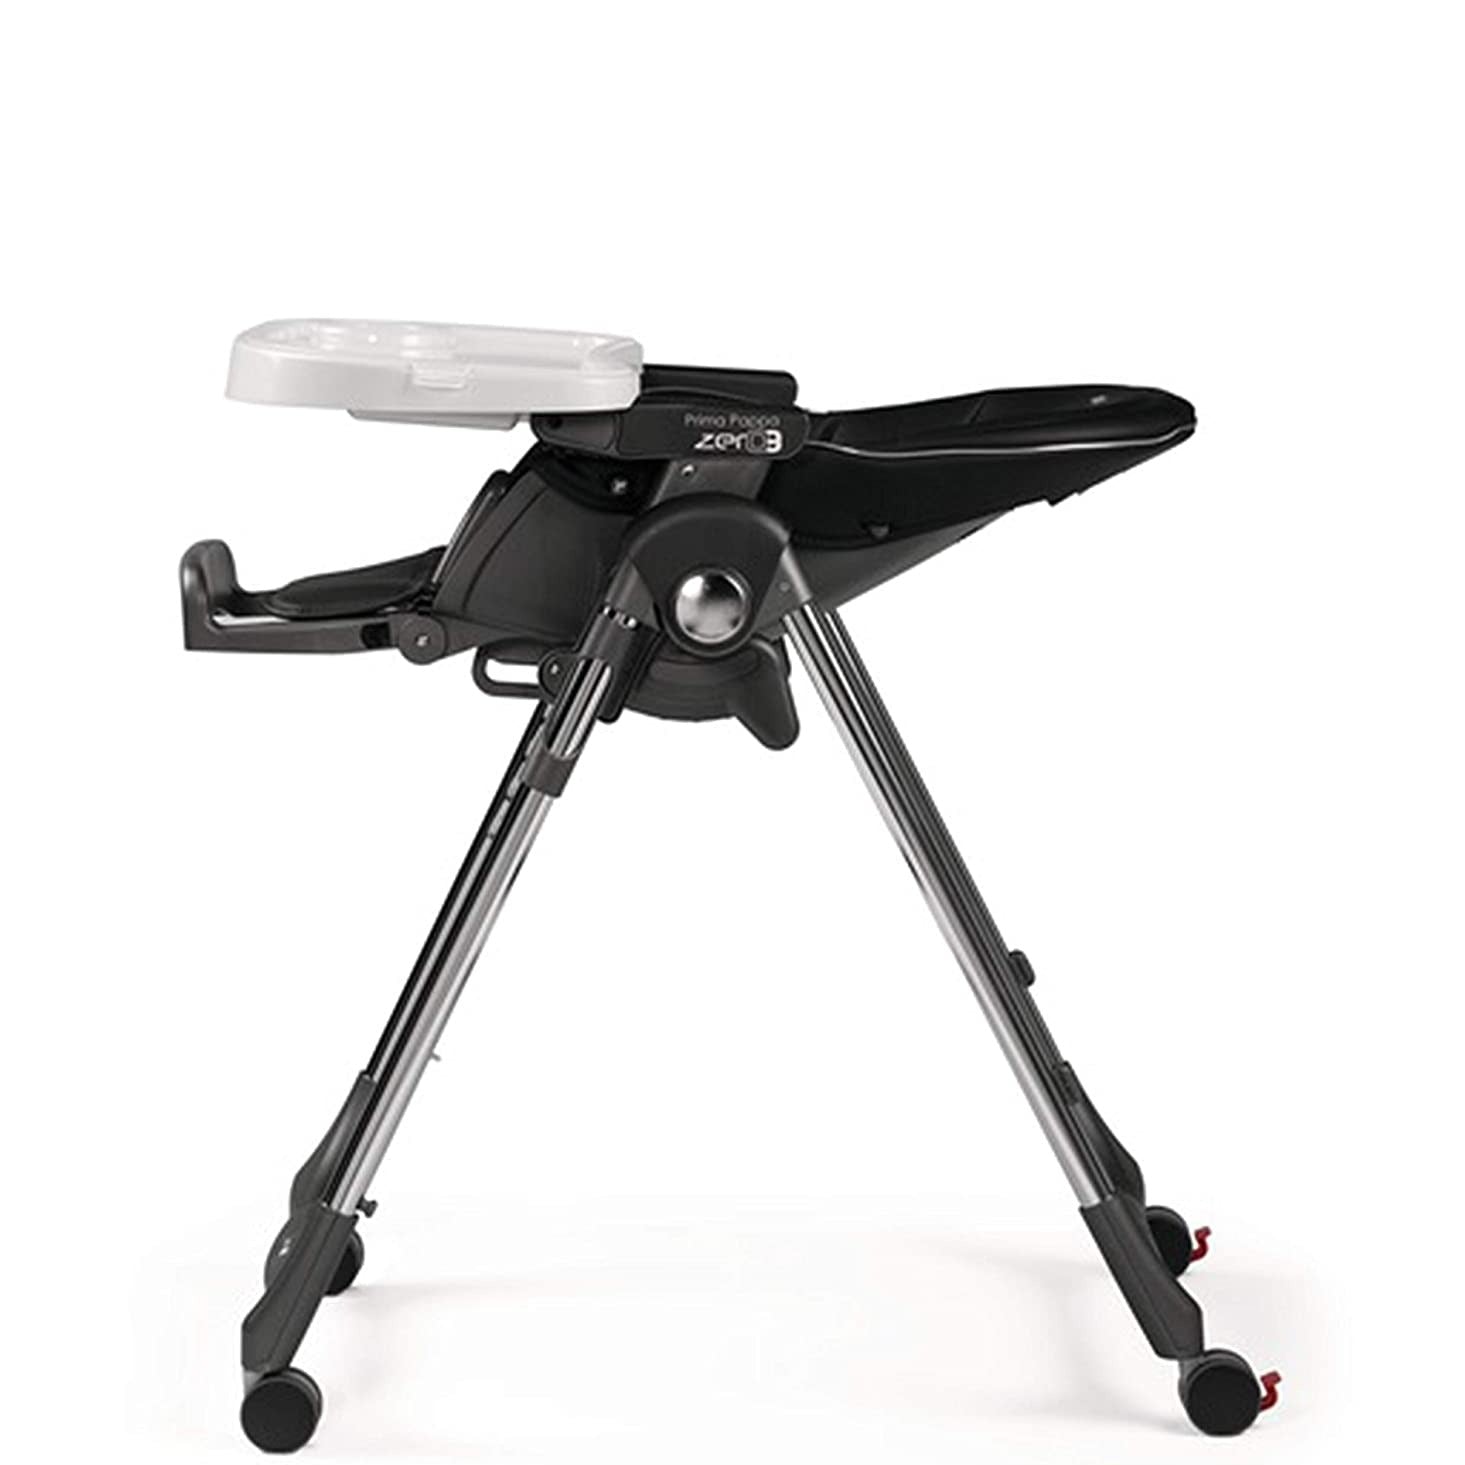  Prima Pappa Zero 3 - High Chair - for Children Newborn to 3  Years of Age - Made in Italy - Ambiance Licorice (Black) : Baby